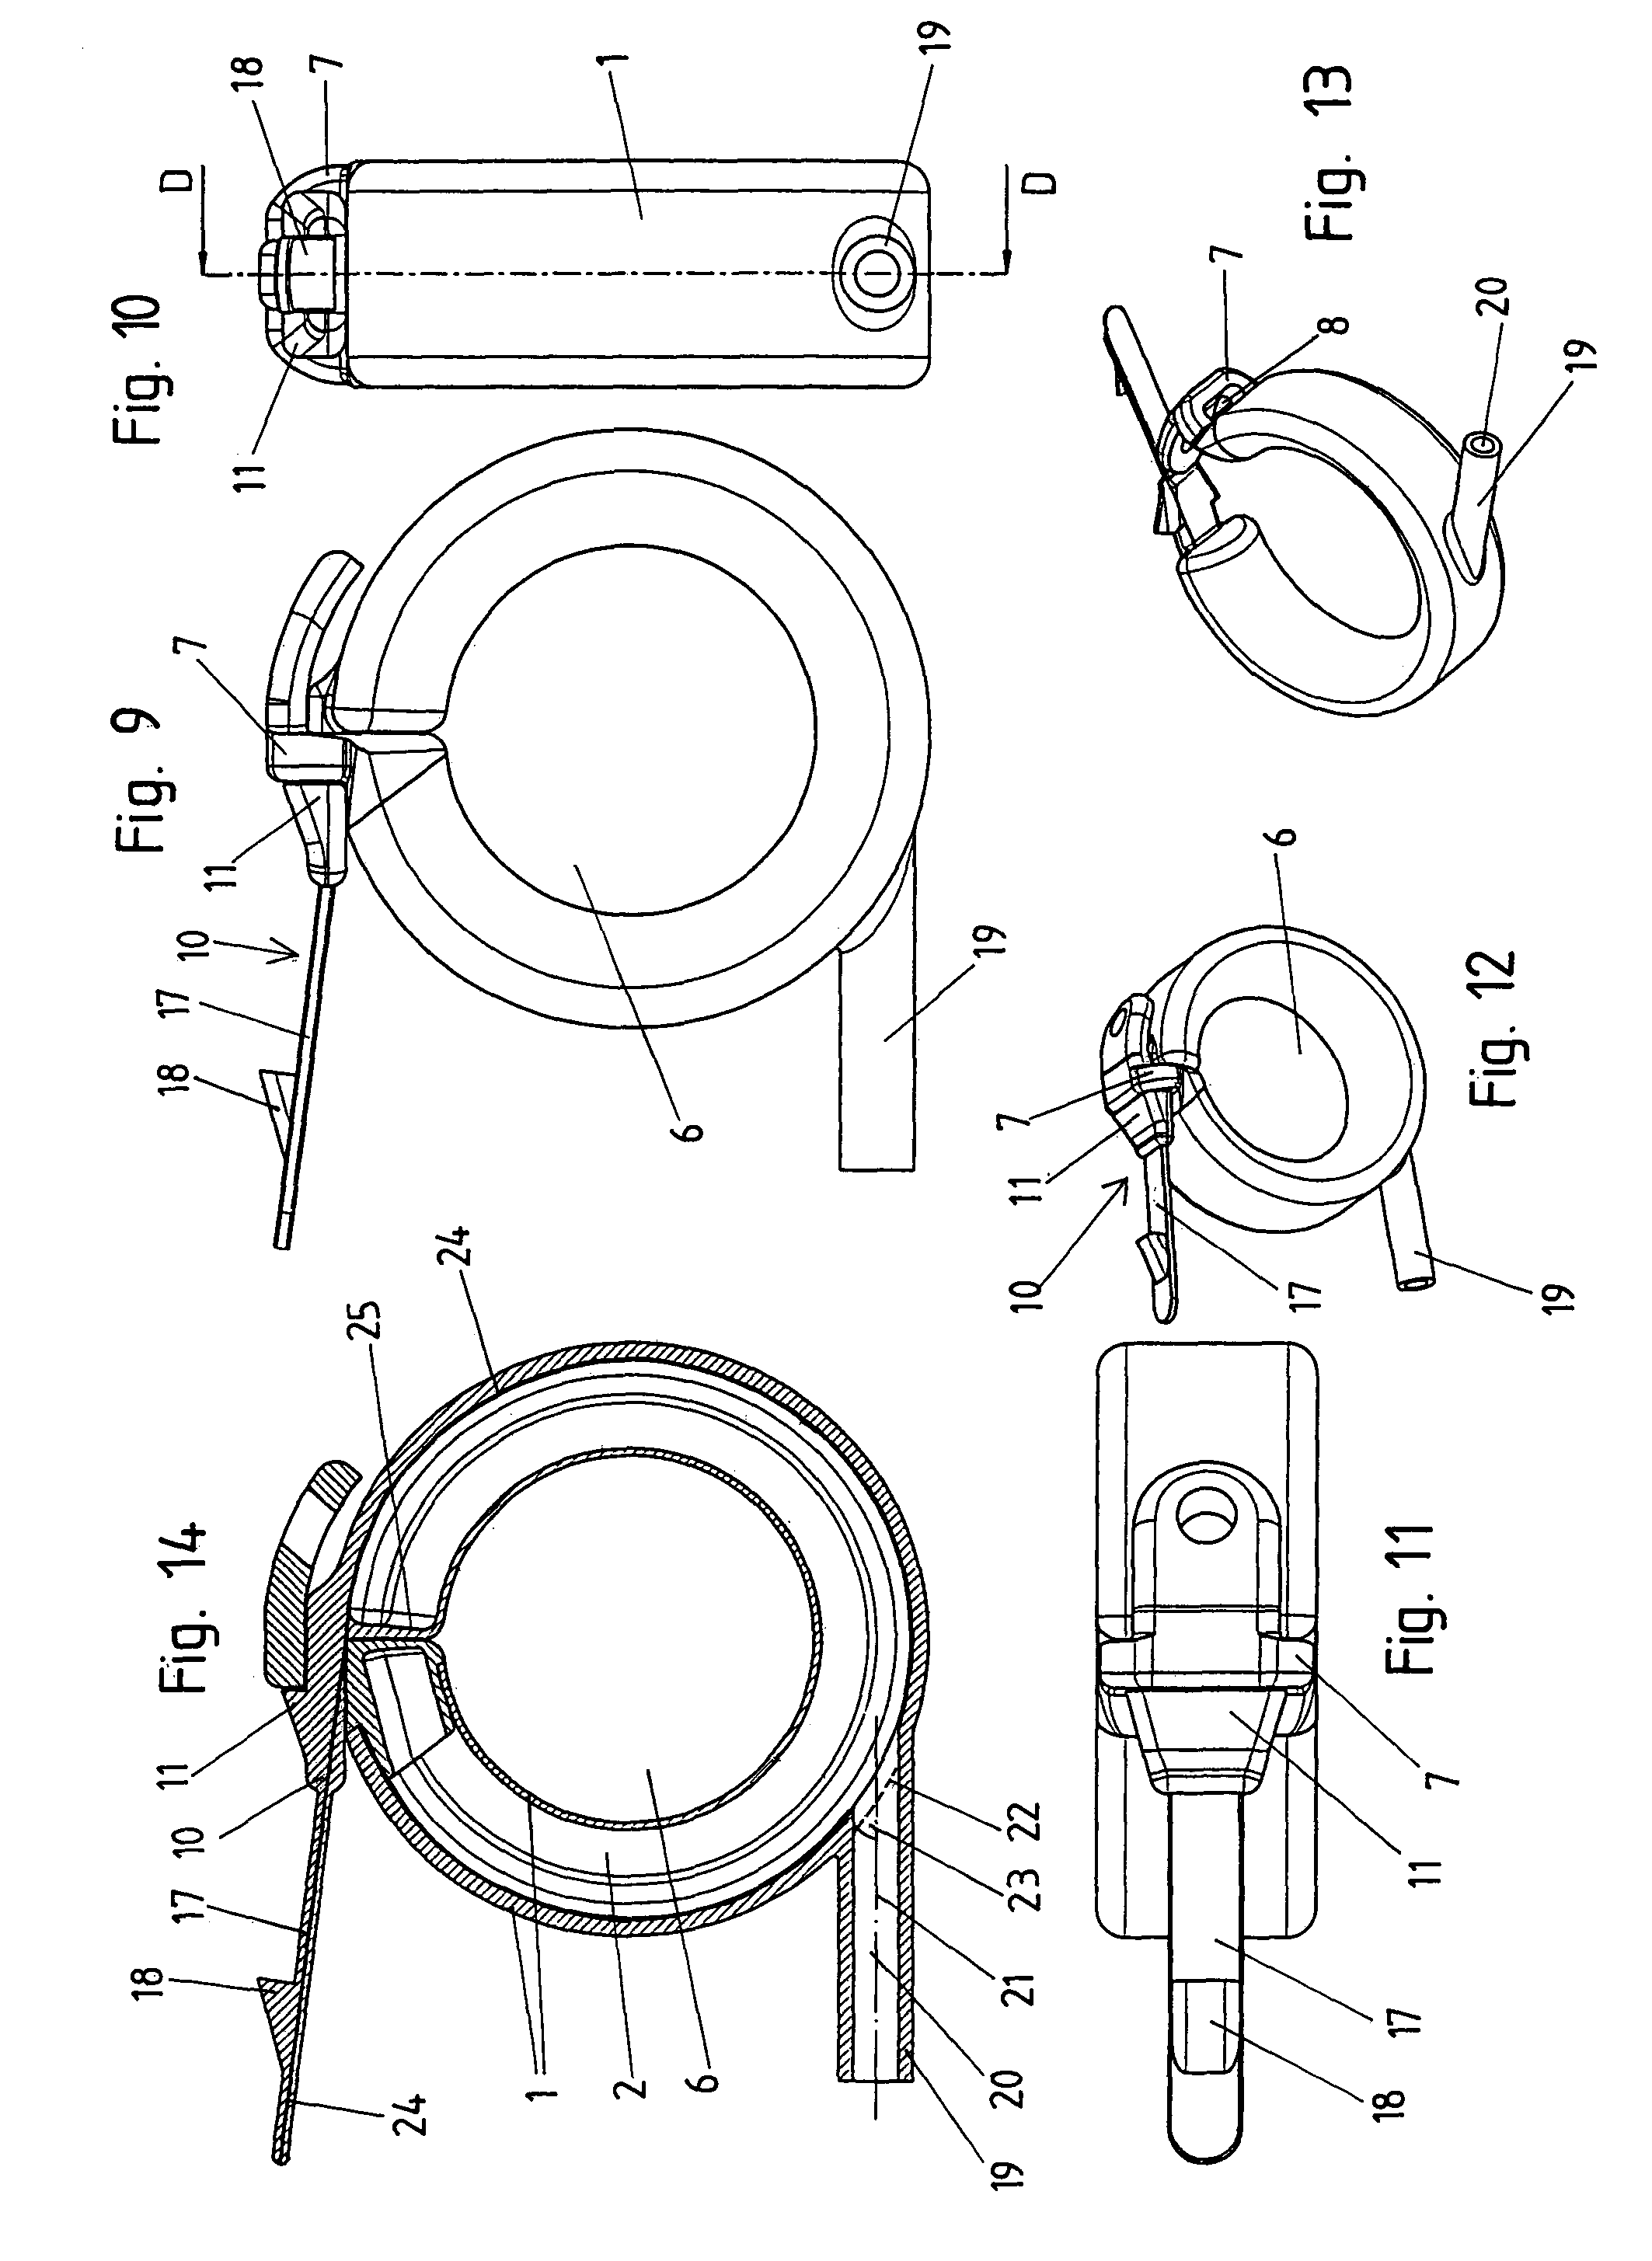 Device for generating an artificial constriction in the gastrointestinal tract